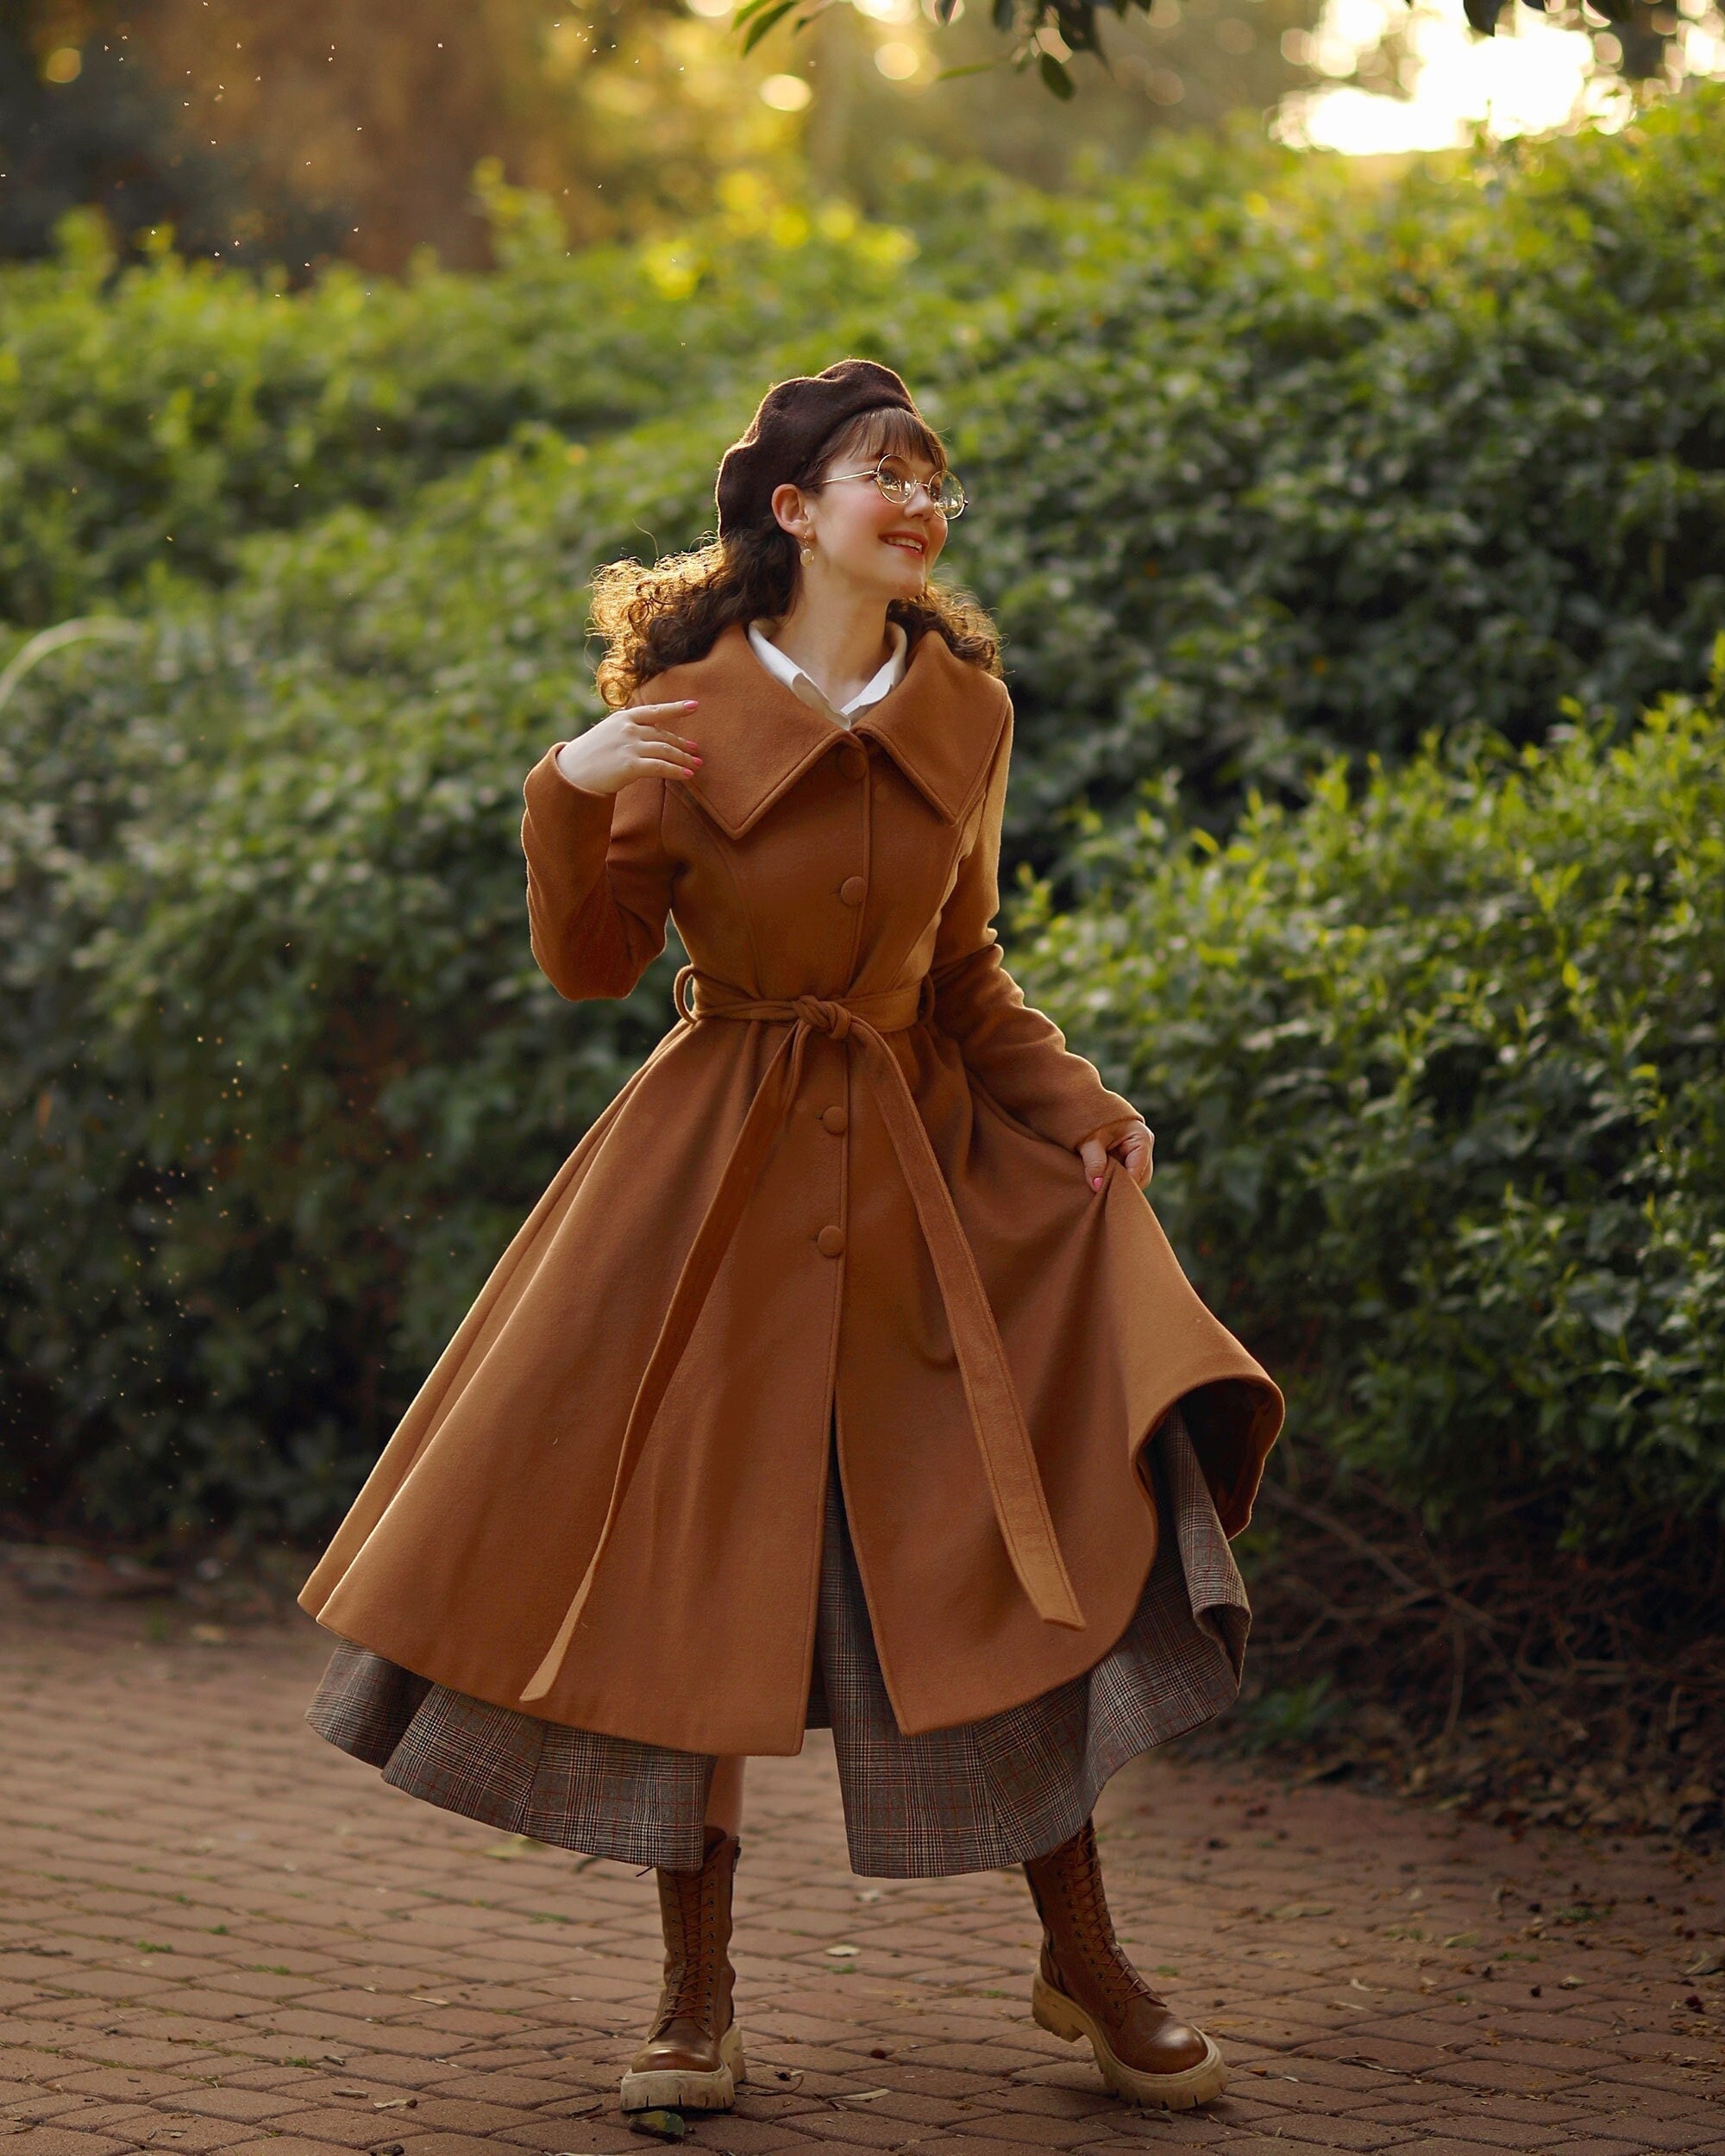 British Style Long Wool Coat in Green Warm Coat Women Vintage Winter Coat  Fit and Flare Solid Coat Maxi Soft Wool Coat With Belt 2842 